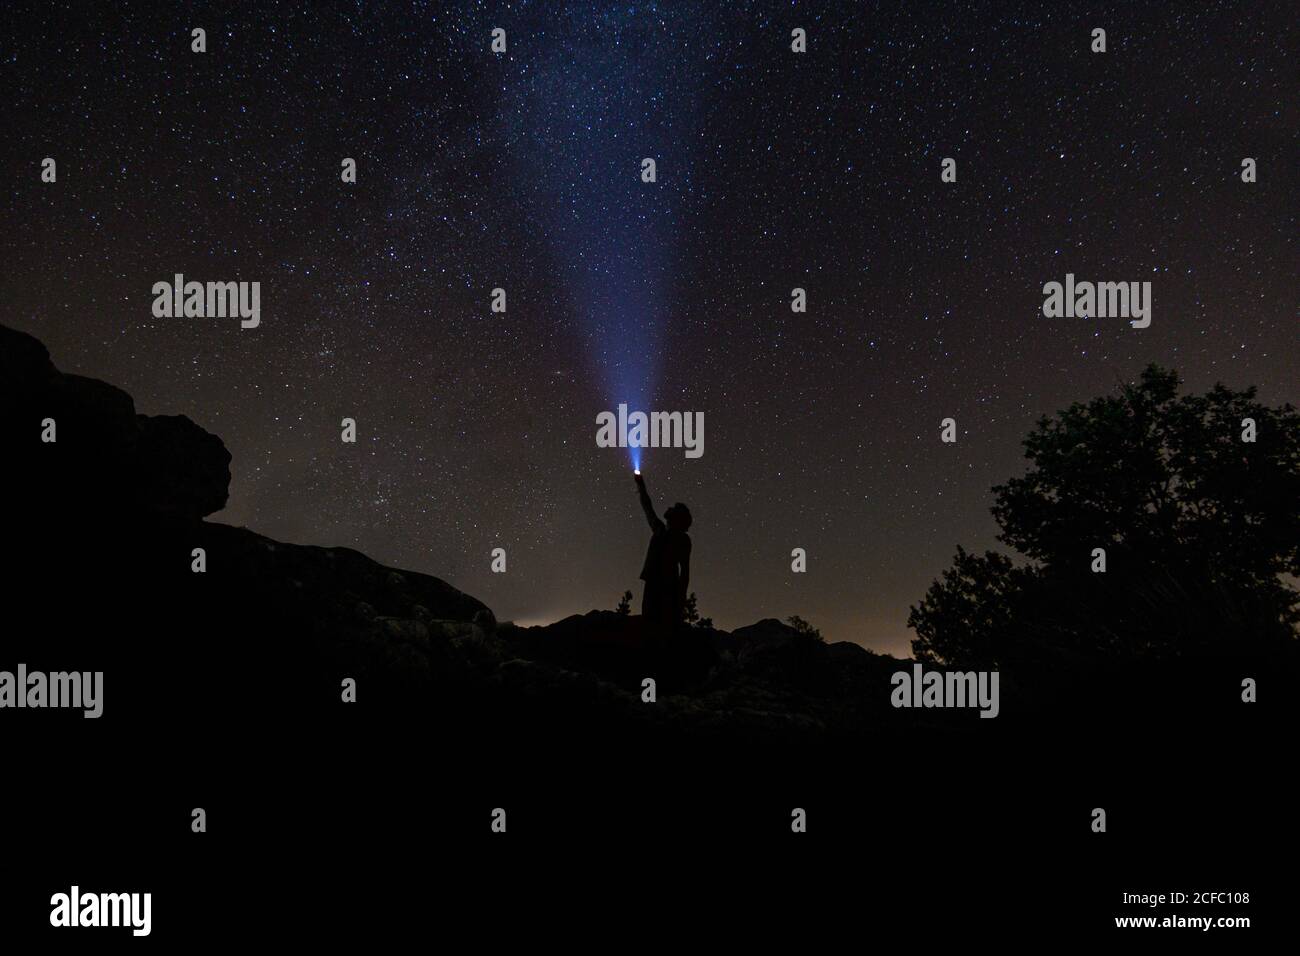 Night sky with the silhouette of a Man lighting with a flashlight Stock Photo